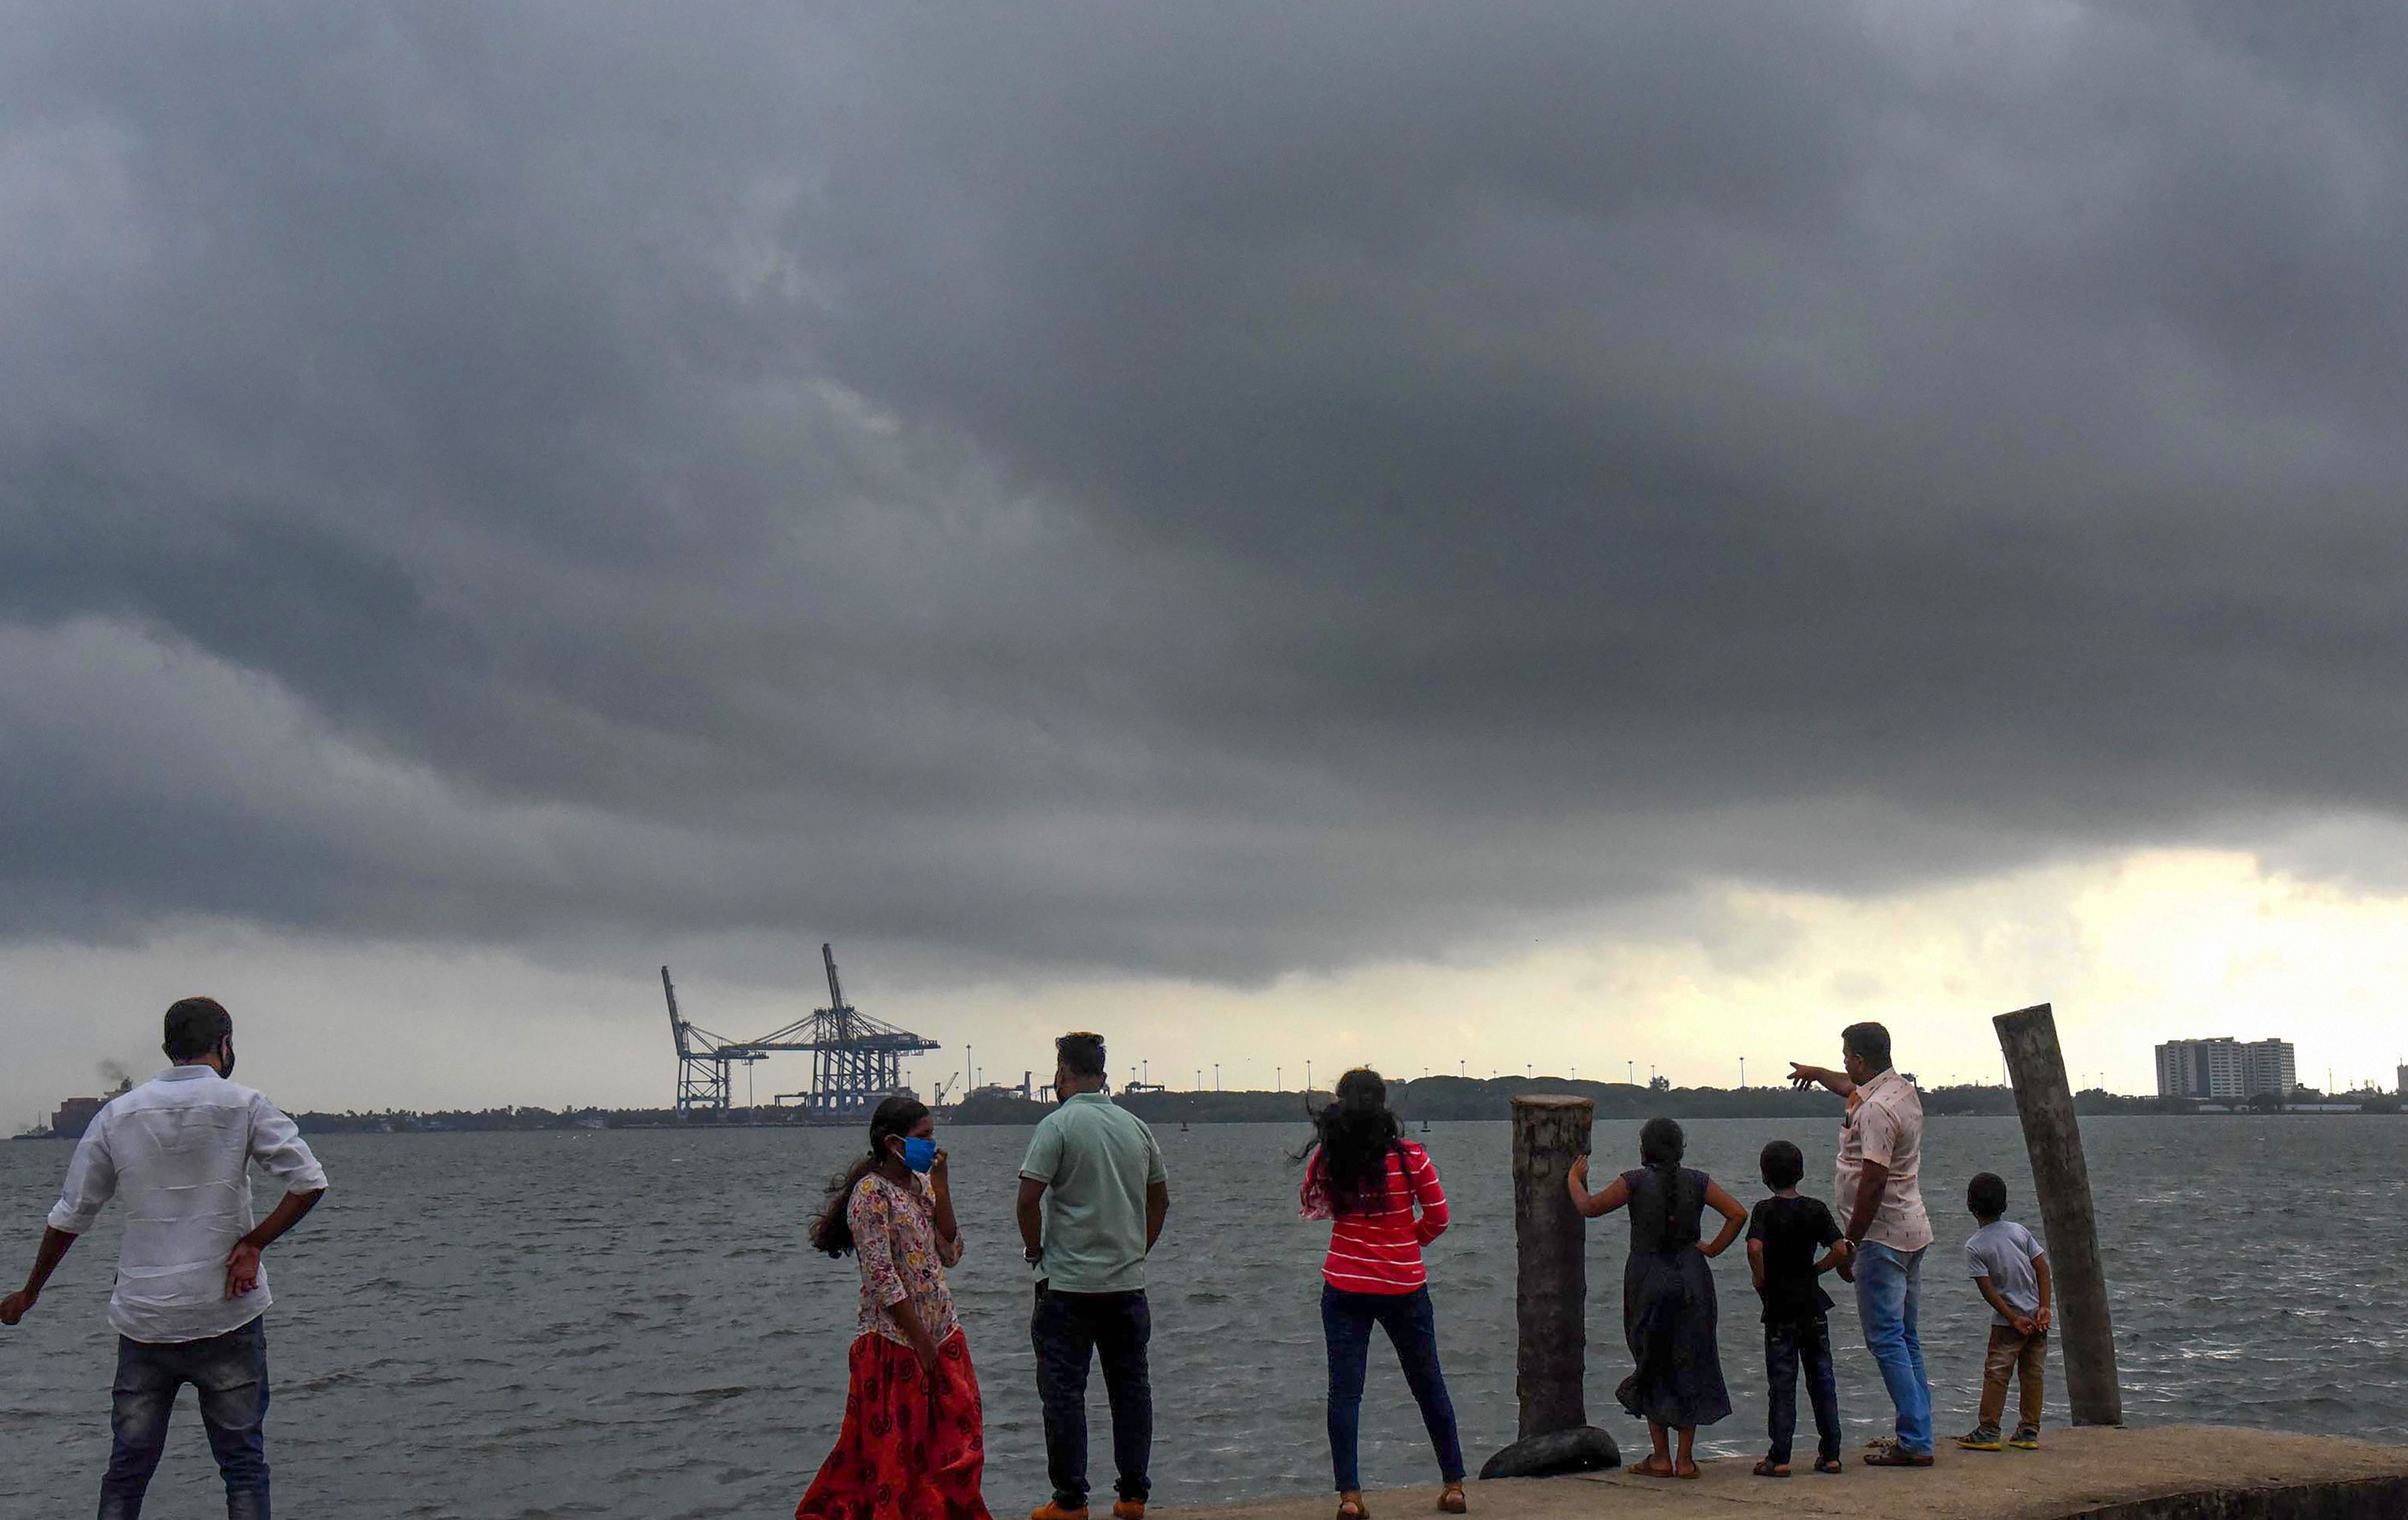 People watch as dark clouds gather in the sky over backwaters, during the ongoing COVID-19 lockdown, in Kochi, Wednesday, May 27, 2020. The meteorological department has predicted heavy rain in the state for three days from Friday onwards. (PTI Photo)